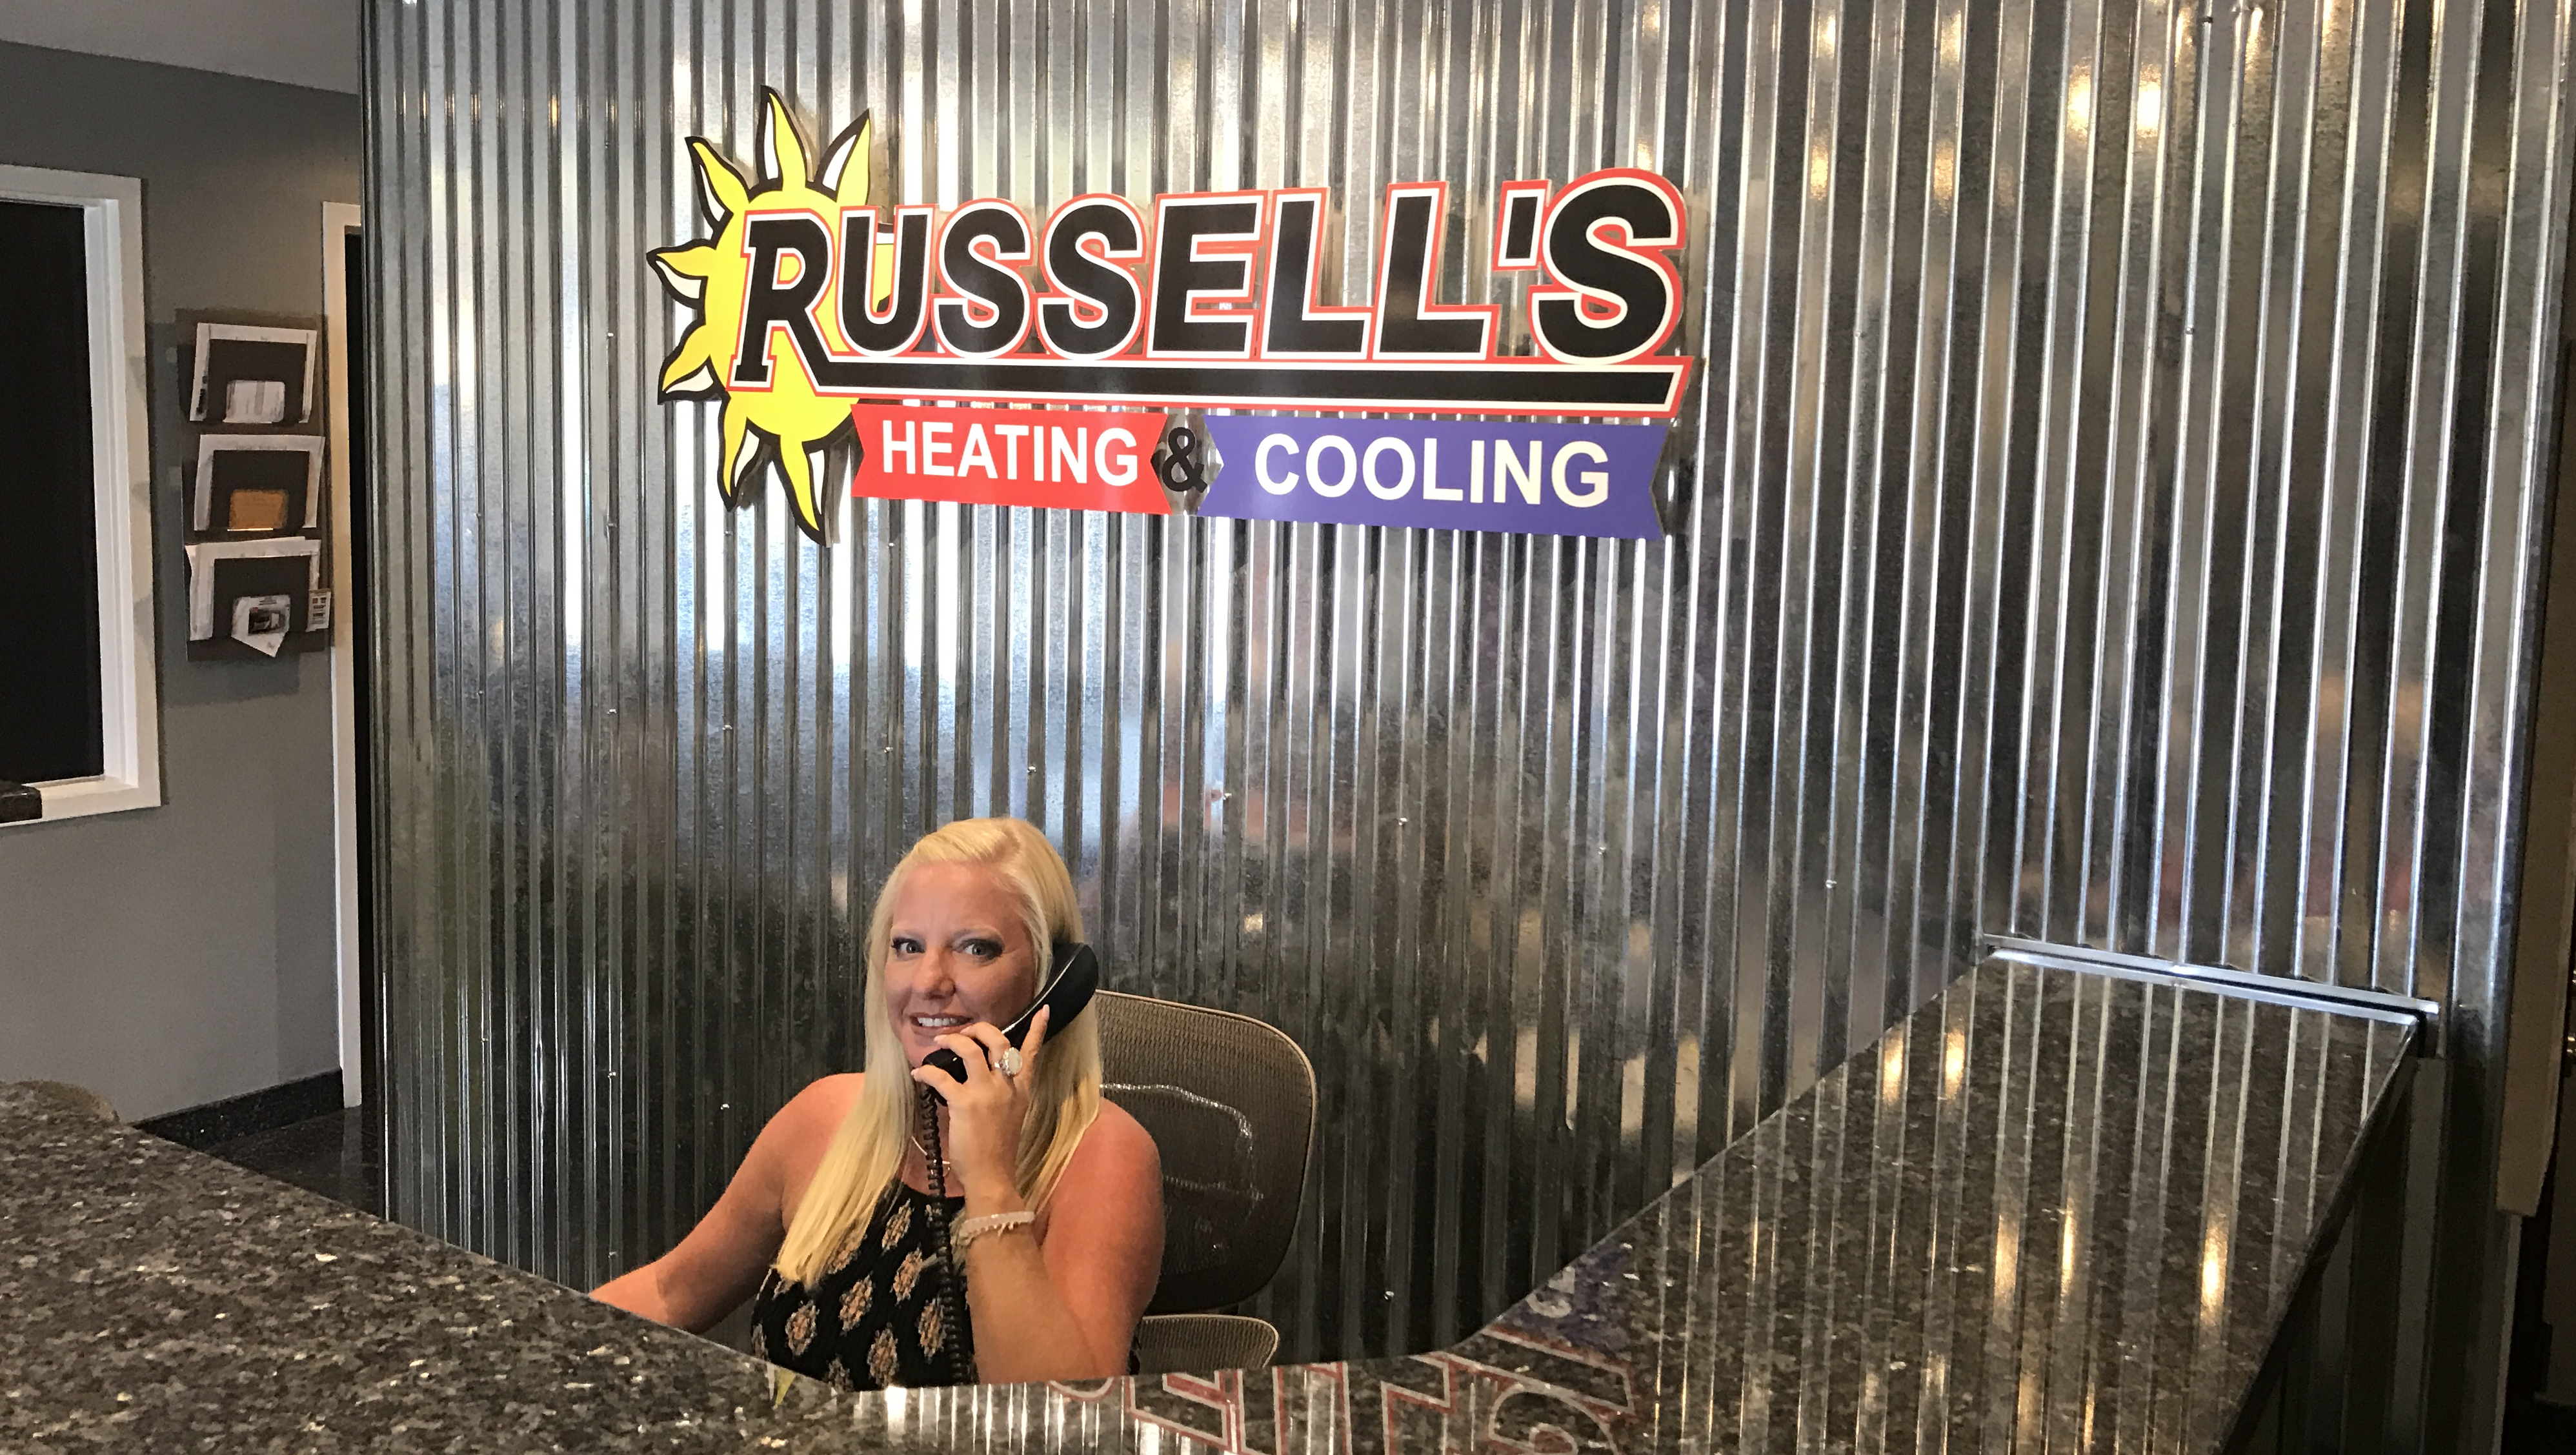 Here at Russell's we are always happy to take your call! 